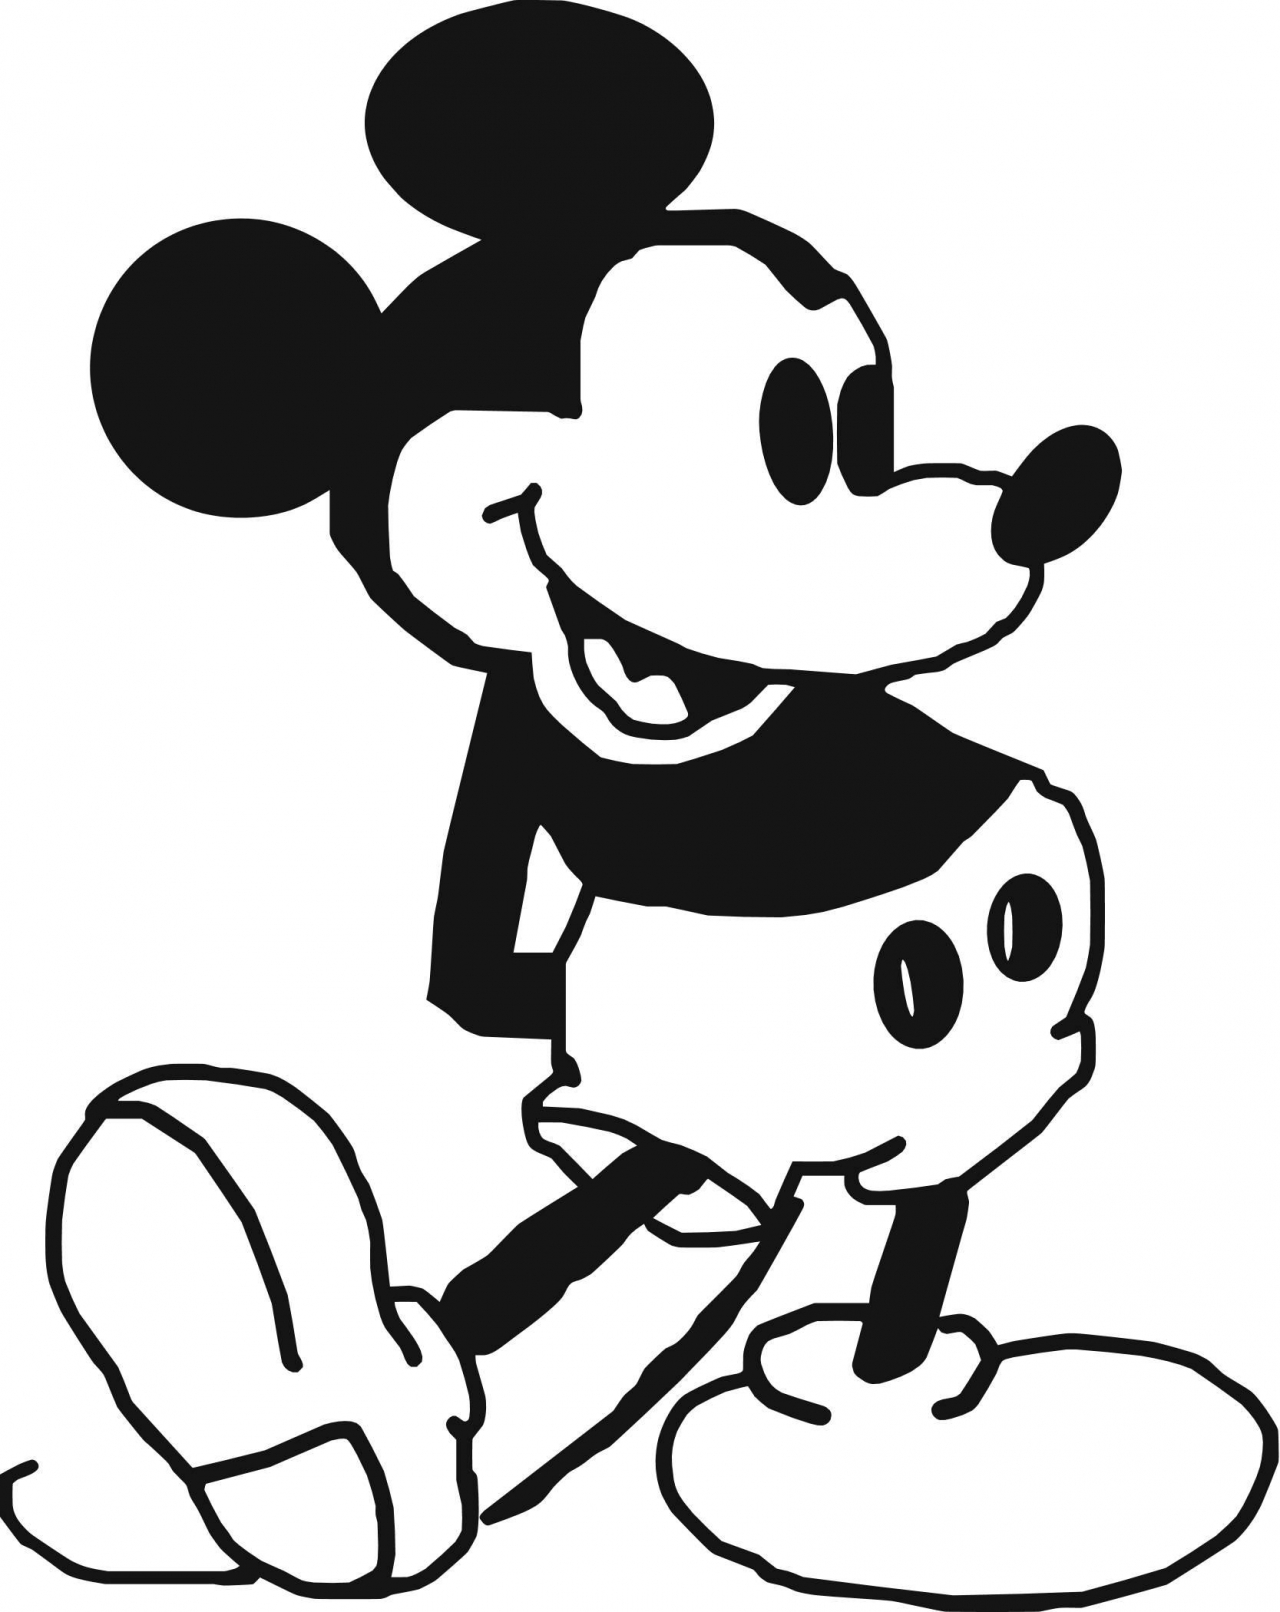 mickey mouse wallpaper black and white,cartoon,clip art,line art,black and white,illustration